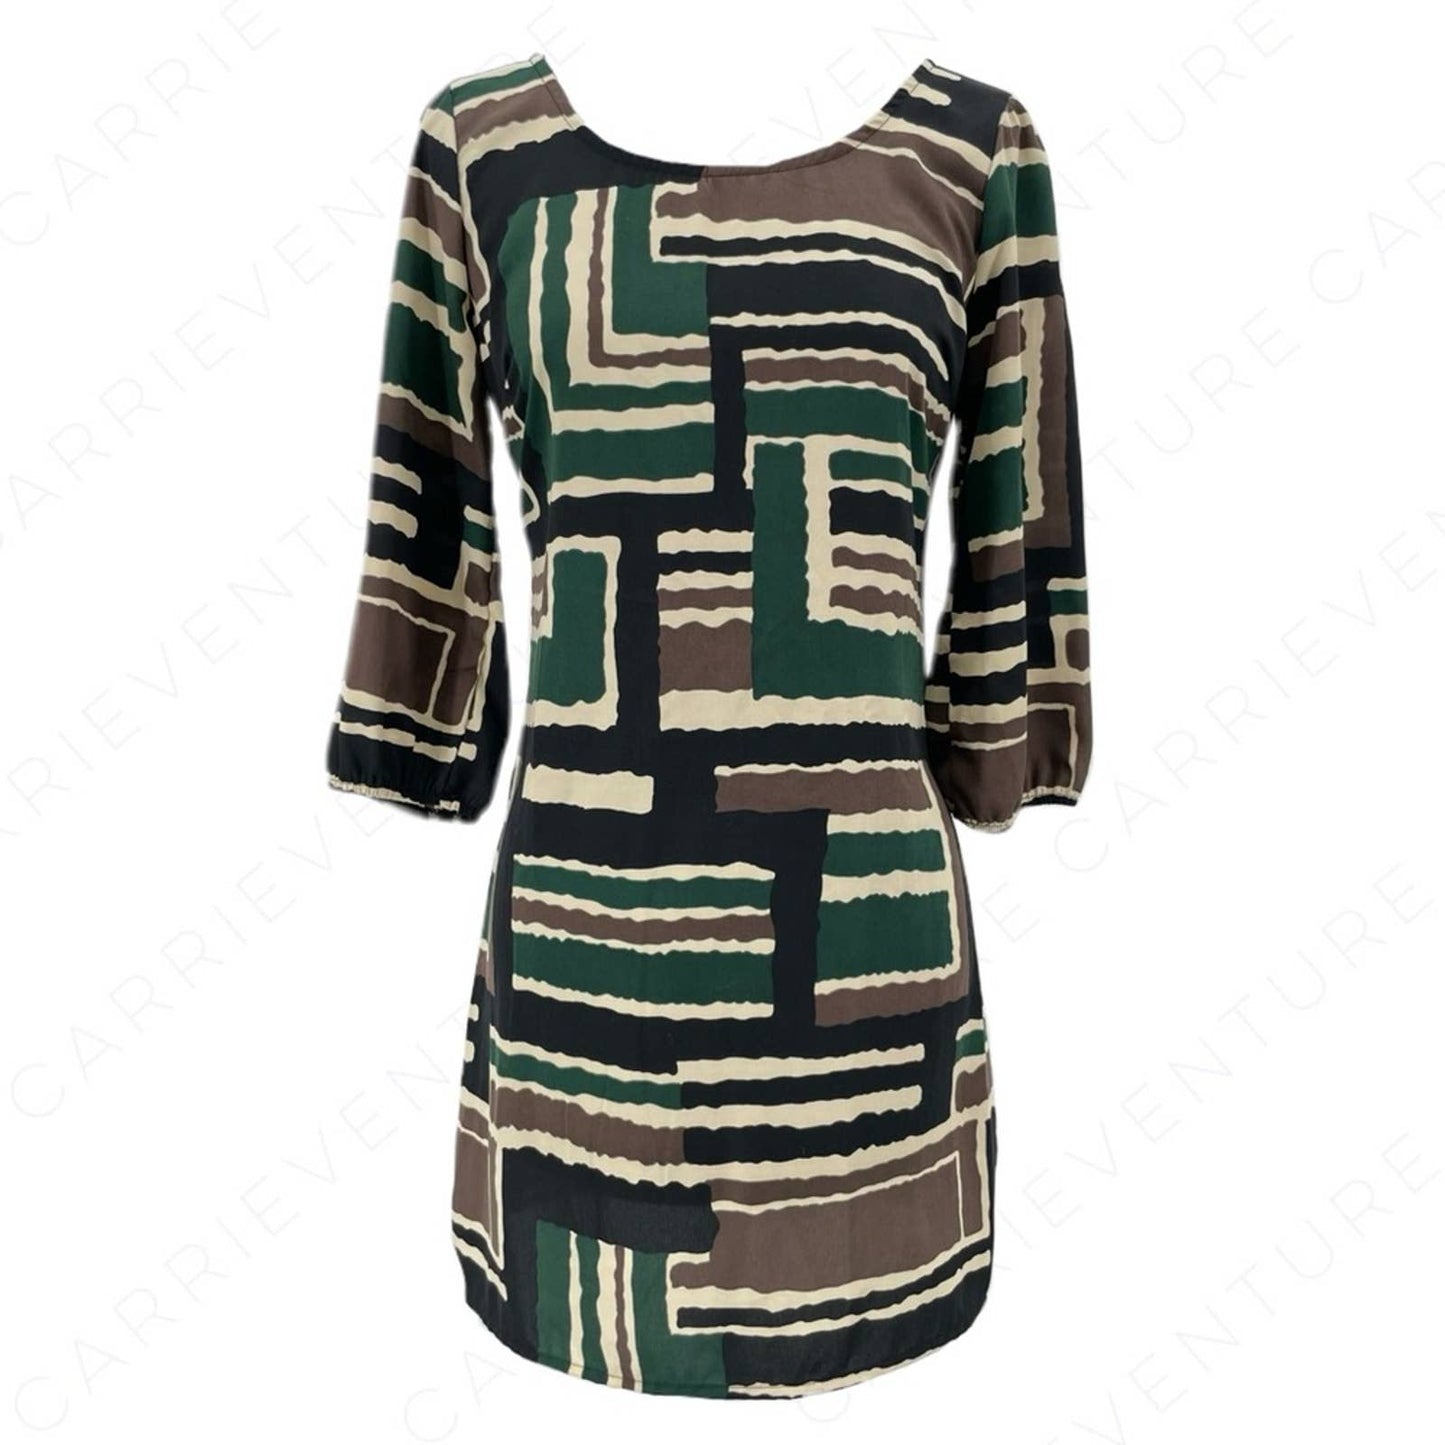 Retro Dress MidMod Vibes Abstract Cocktail Back Zip Geometric Earth Tones Size S